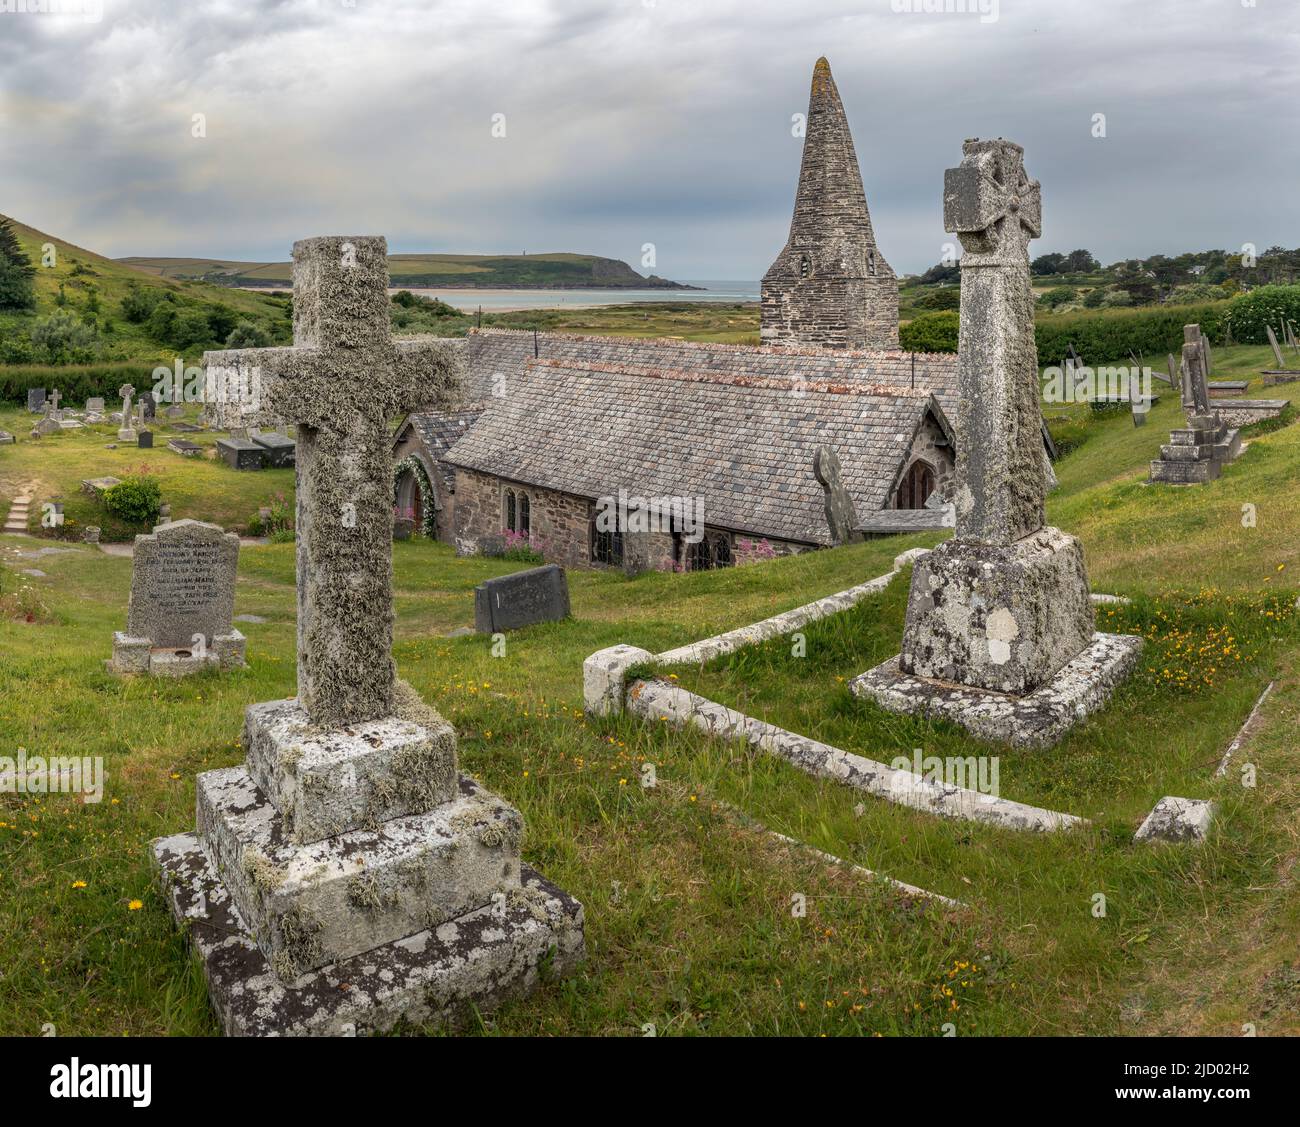 The picturesque Church of St. Enodoc is situated in the sand dunes east of Daymer Bay and Brea Hill on the banks of the River Camel. Wind-driven sand Stock Photo